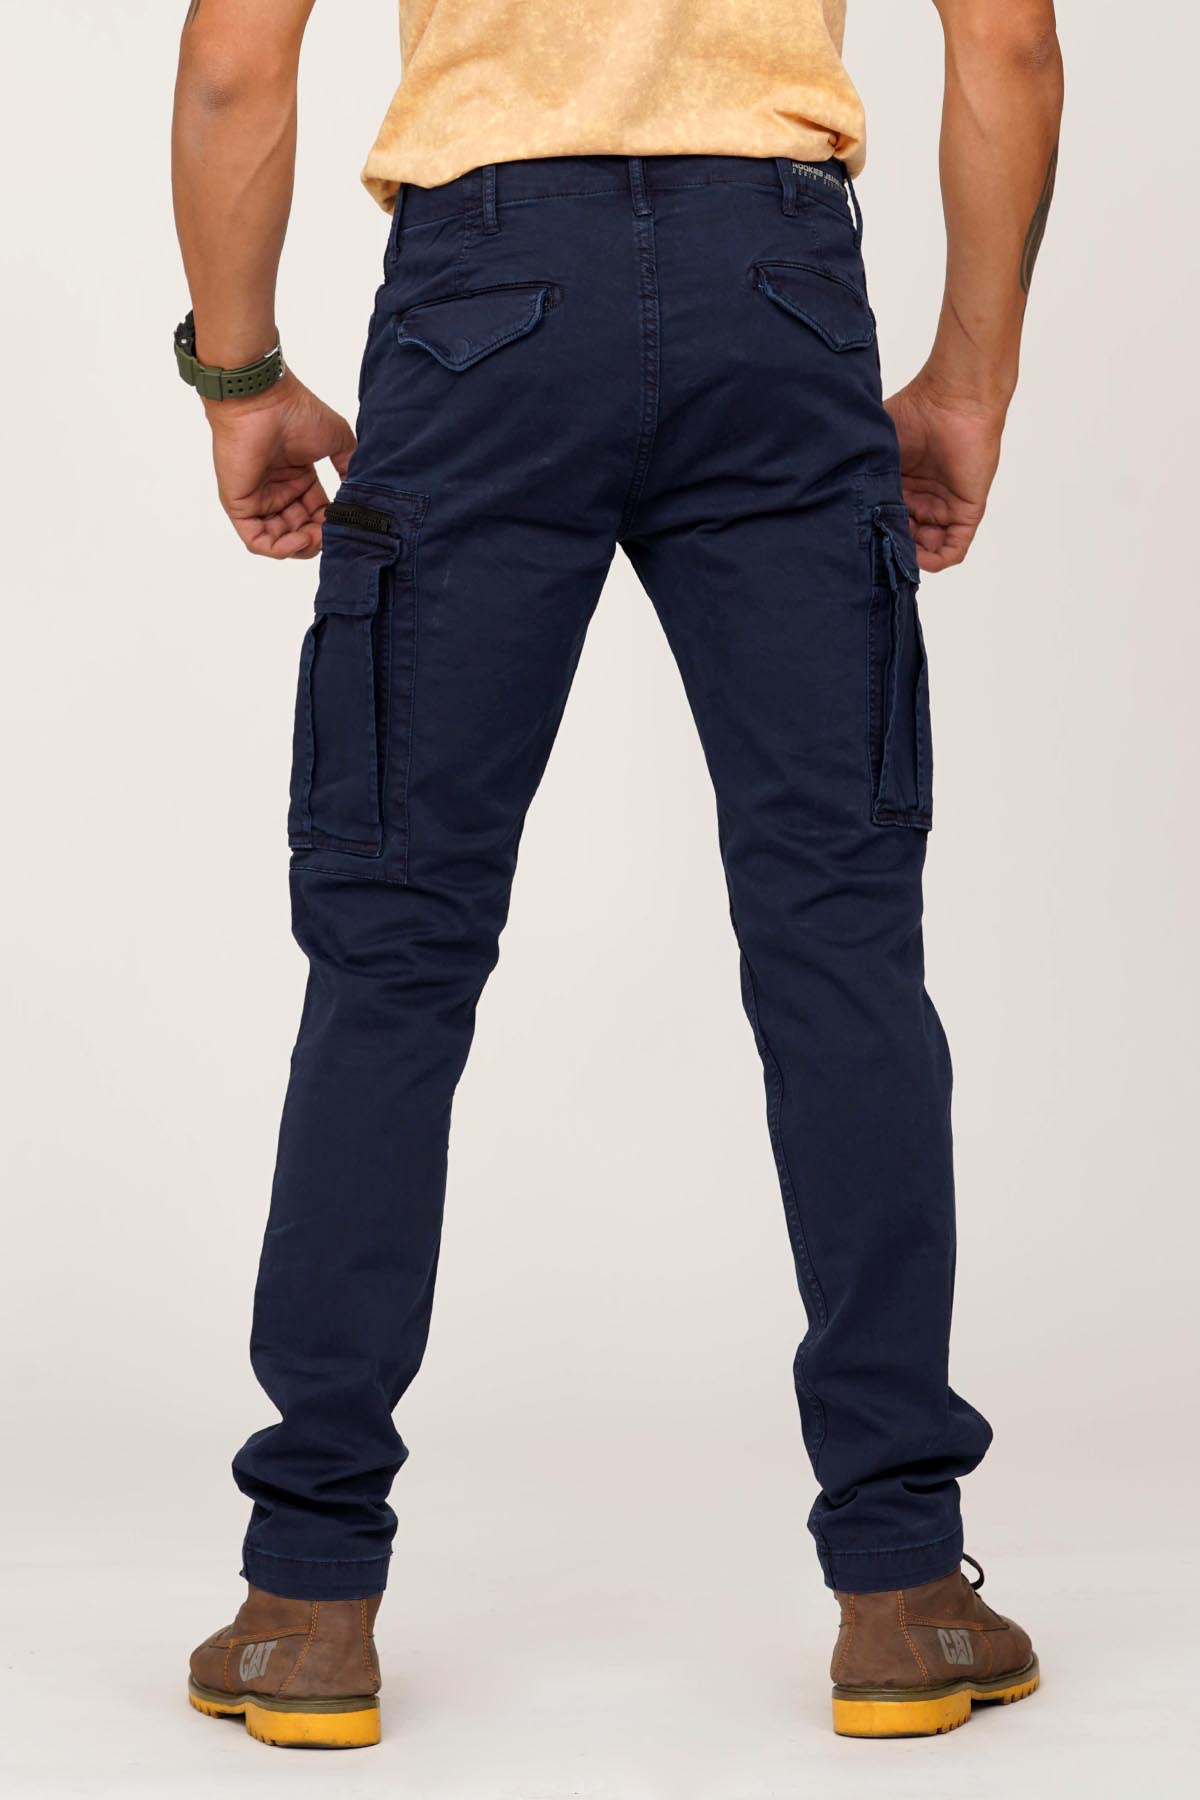 NAVY COTTON SOLID CARGO PANT – ROOKIES